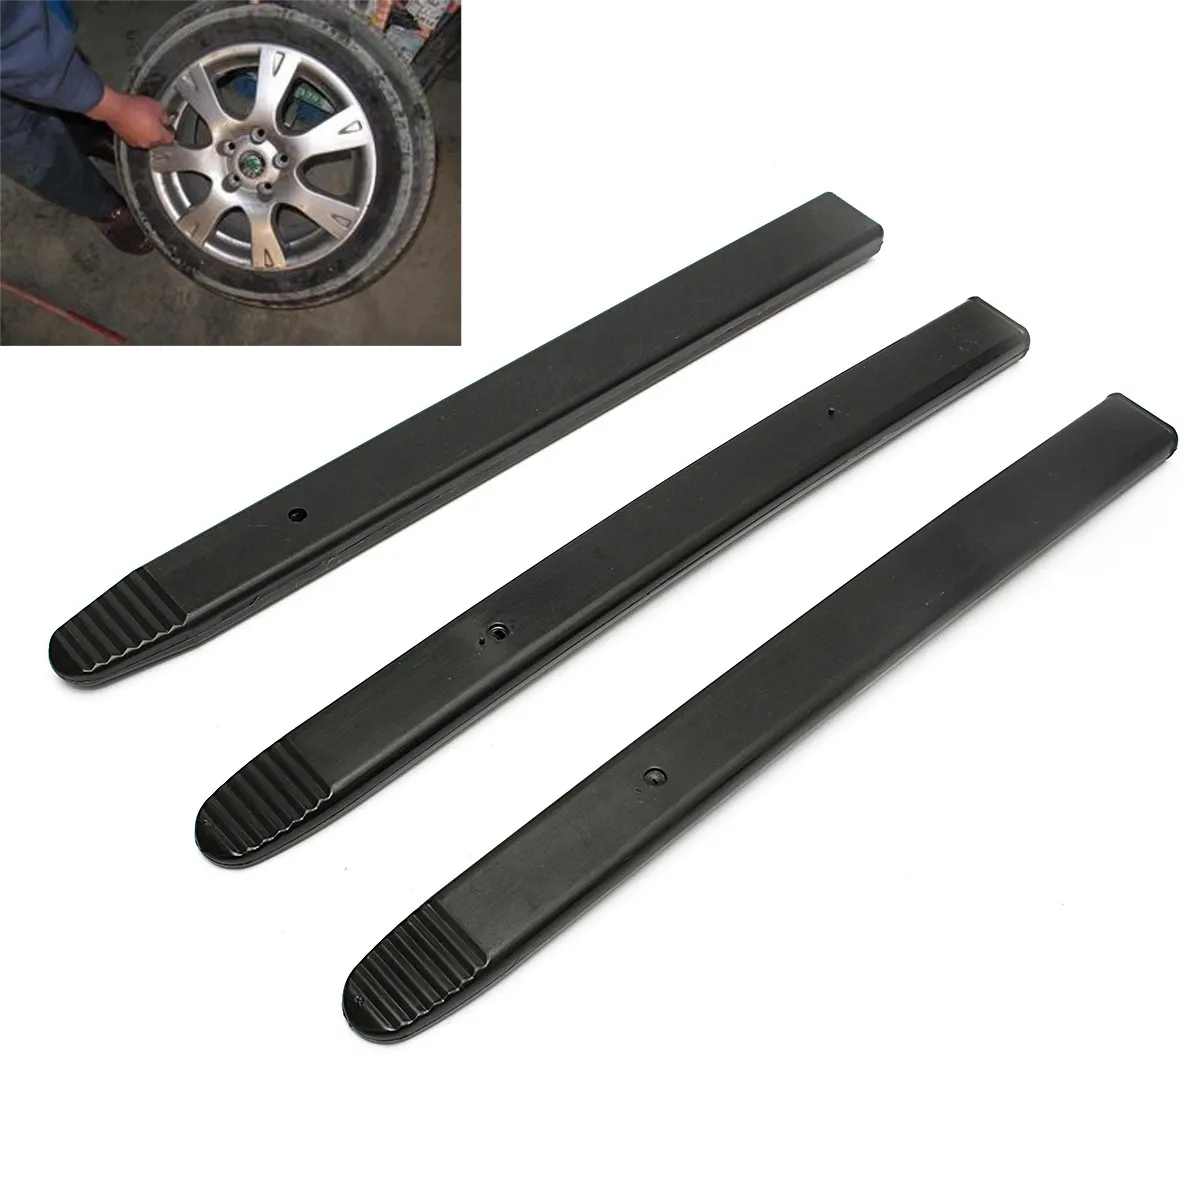 KIMISS Tire Bead Lift Tool,3Pcs Changer Lever Cover Protector Scratch Guard for Tire Bead Lift Tool 